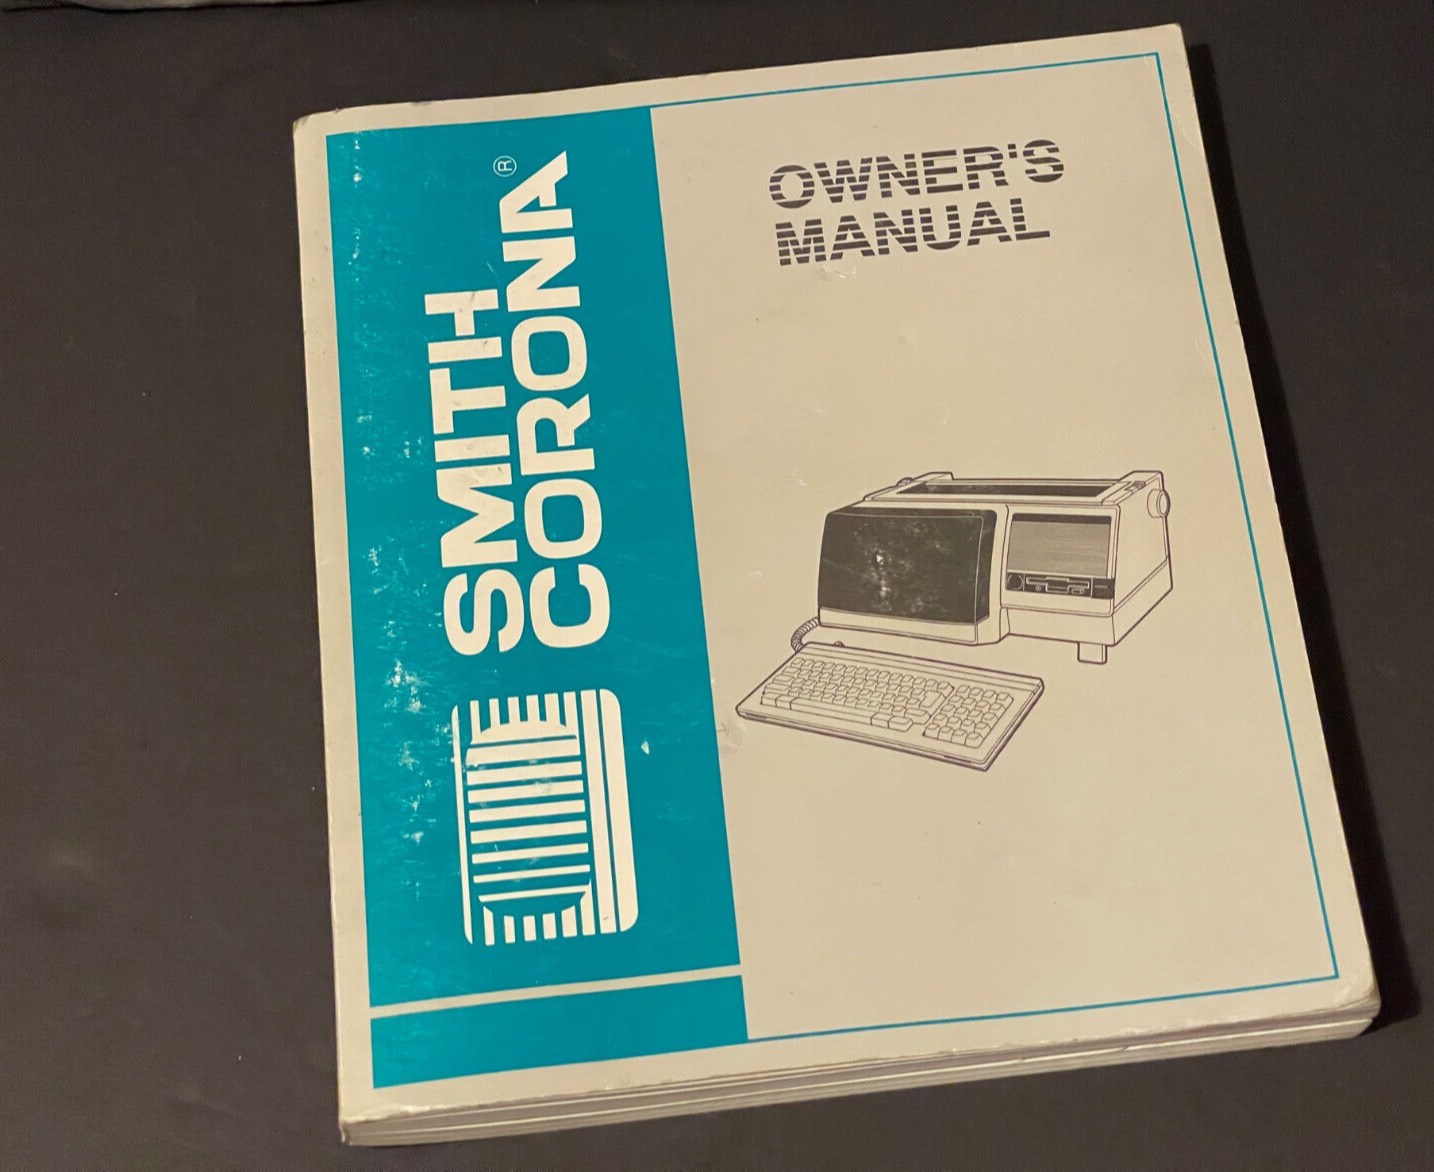 SMITH CORONA COMPUTER OWNERS MANUAL PWP 4600 465 88D VINTAGE COLLECTIBLE